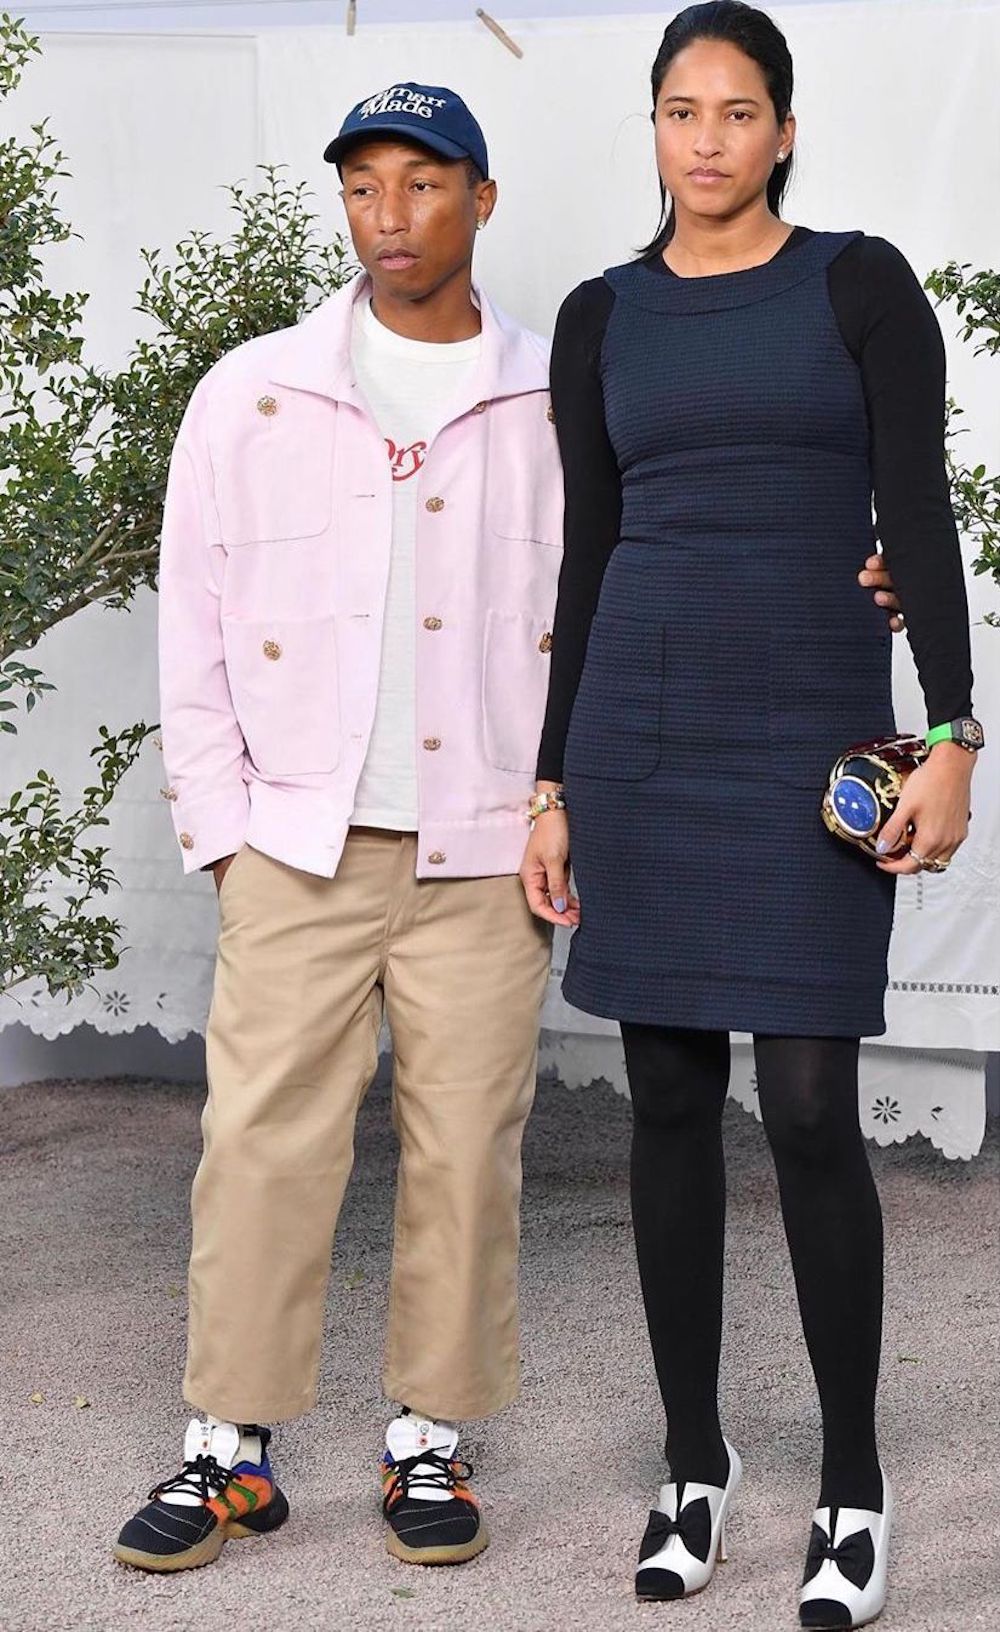 SPOTTED: Pharrell at Chanel Show at Paris Fashion Week – PAUSE Online